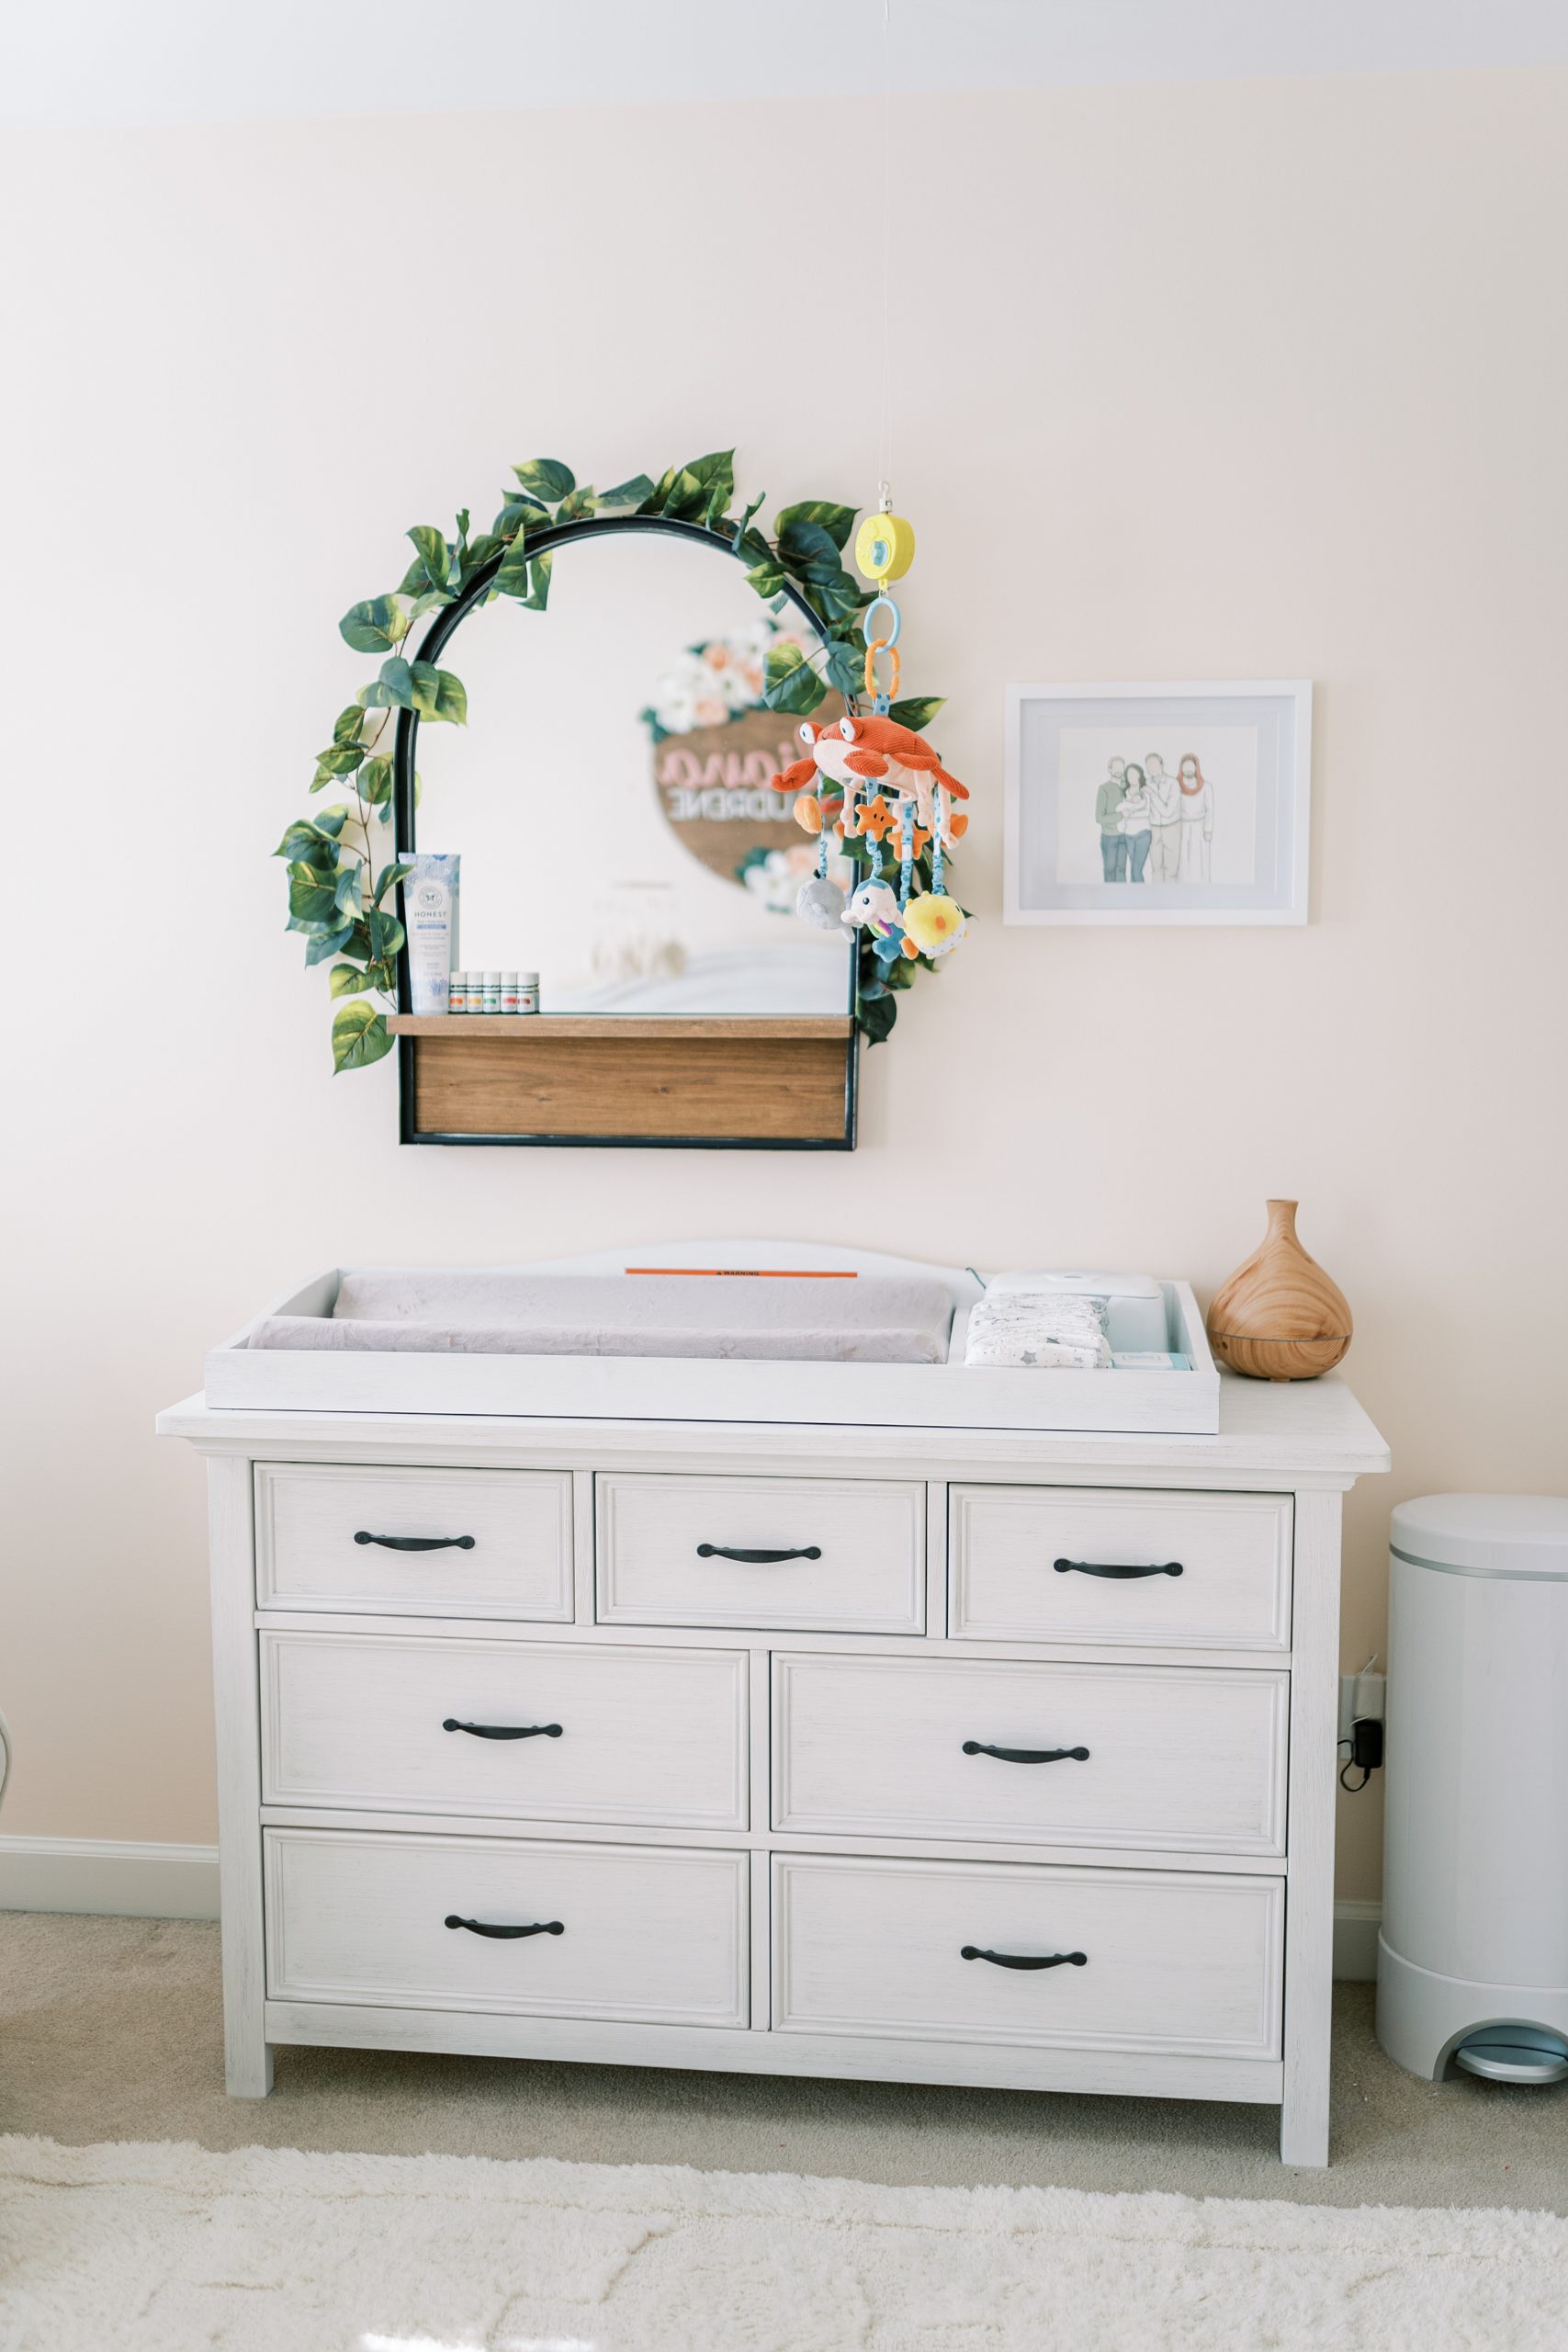 baby girl nursery spotlight- details of nursery featuring mirror and white dresser-changing table